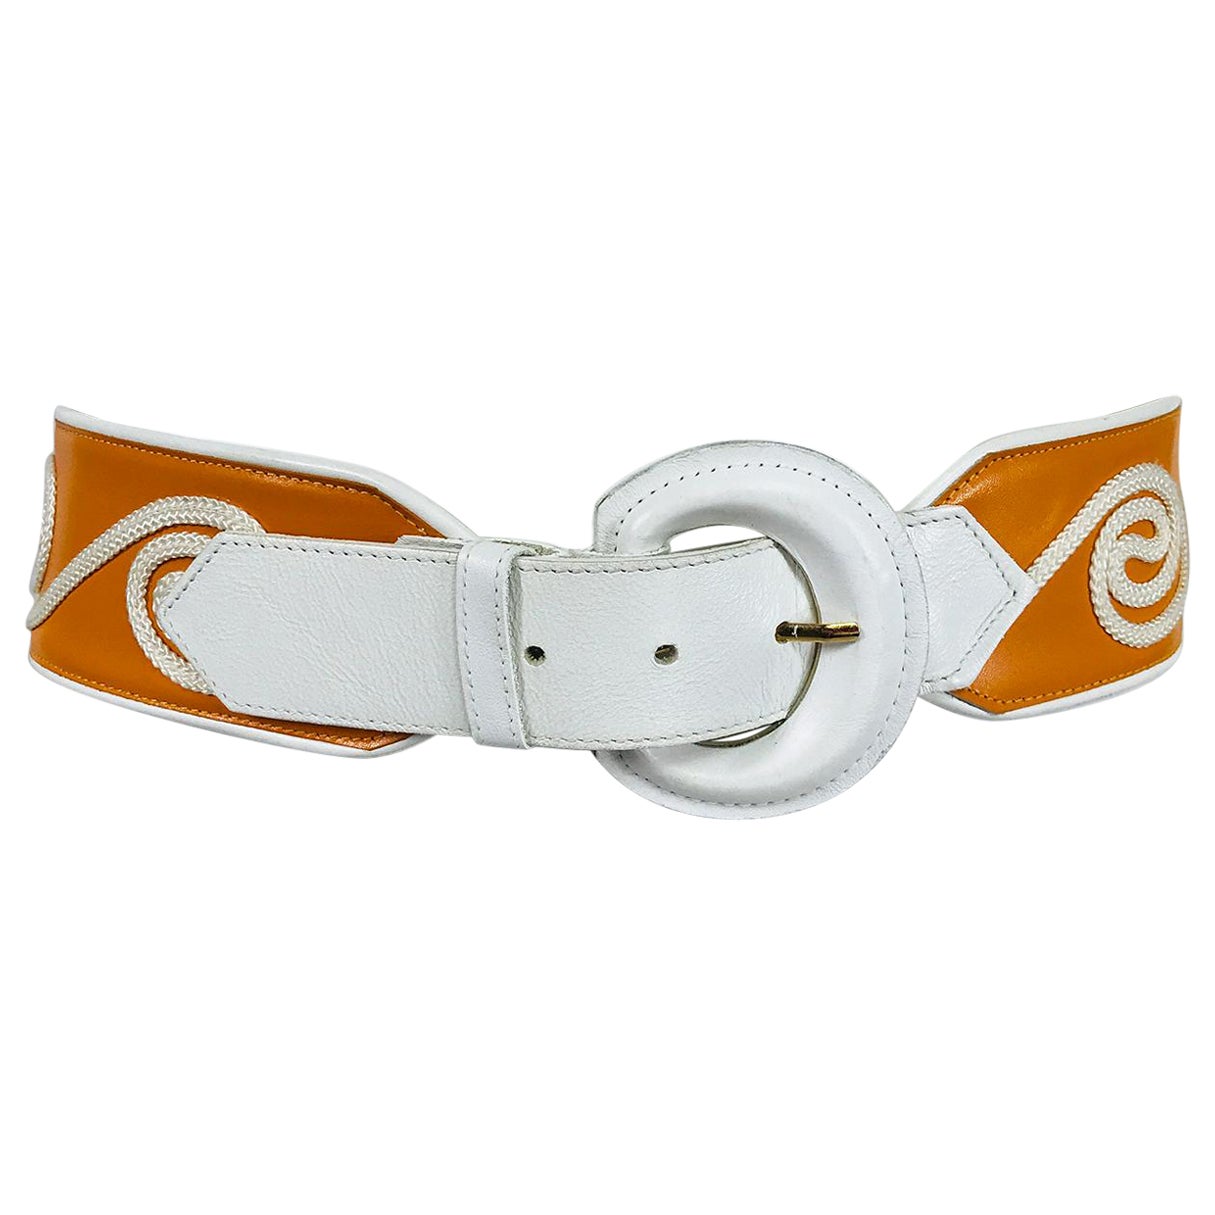  Christian Dior White & Golden Yellow Cord Applique Wide Leather Belt M-L 1990s For Sale